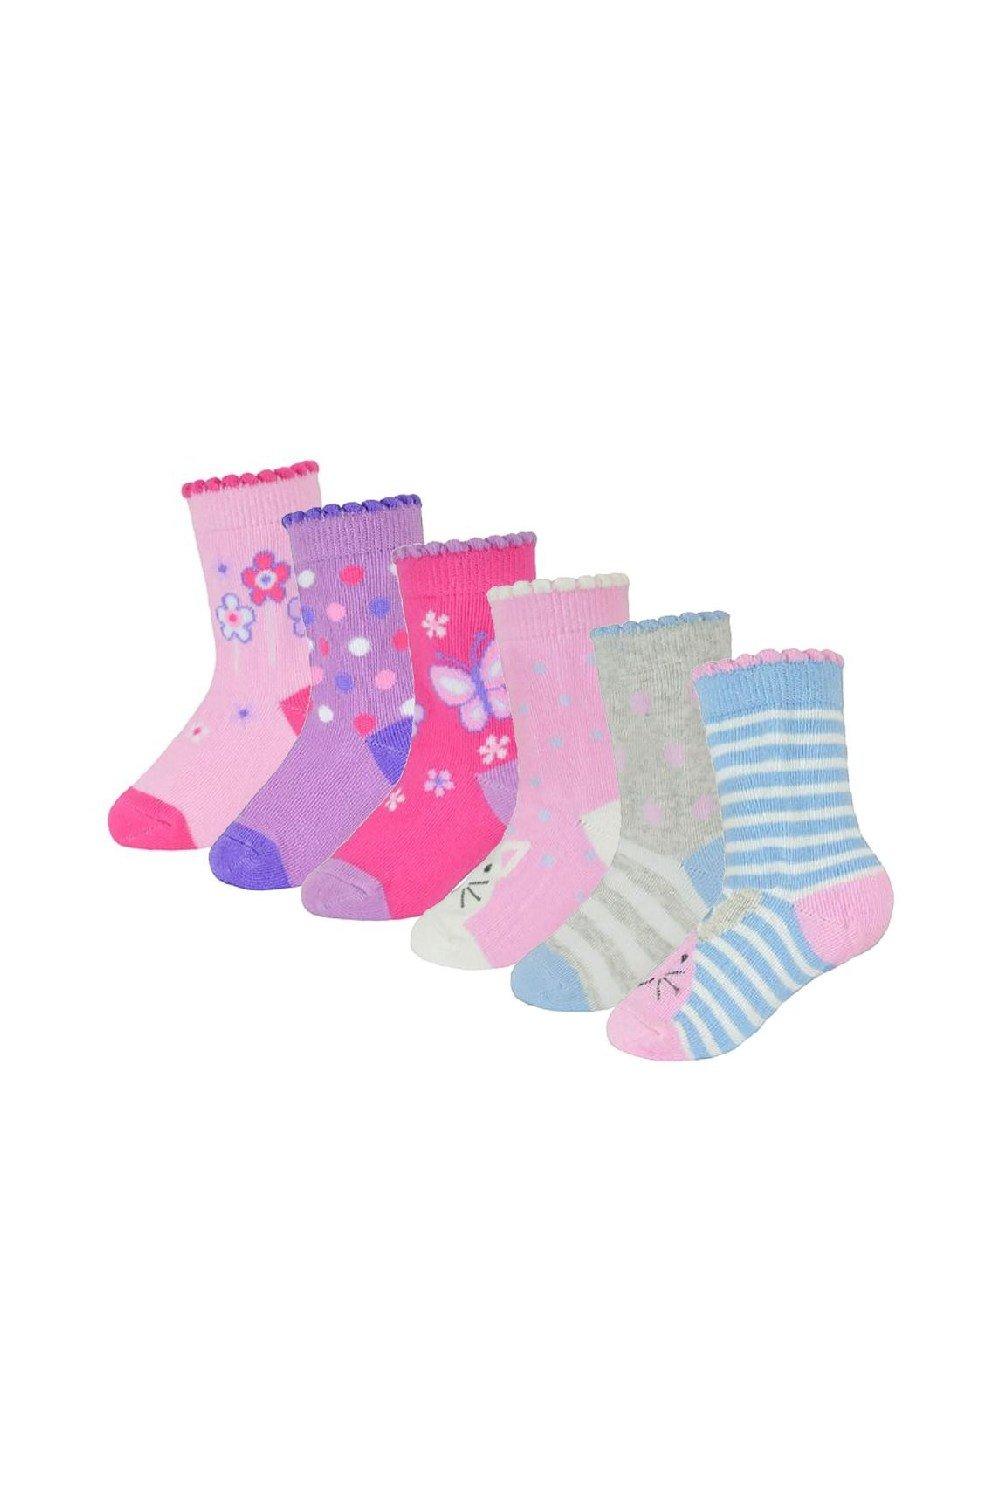 6 Pairs Baby Butterfly Animal Design Comfortable Soft Socks